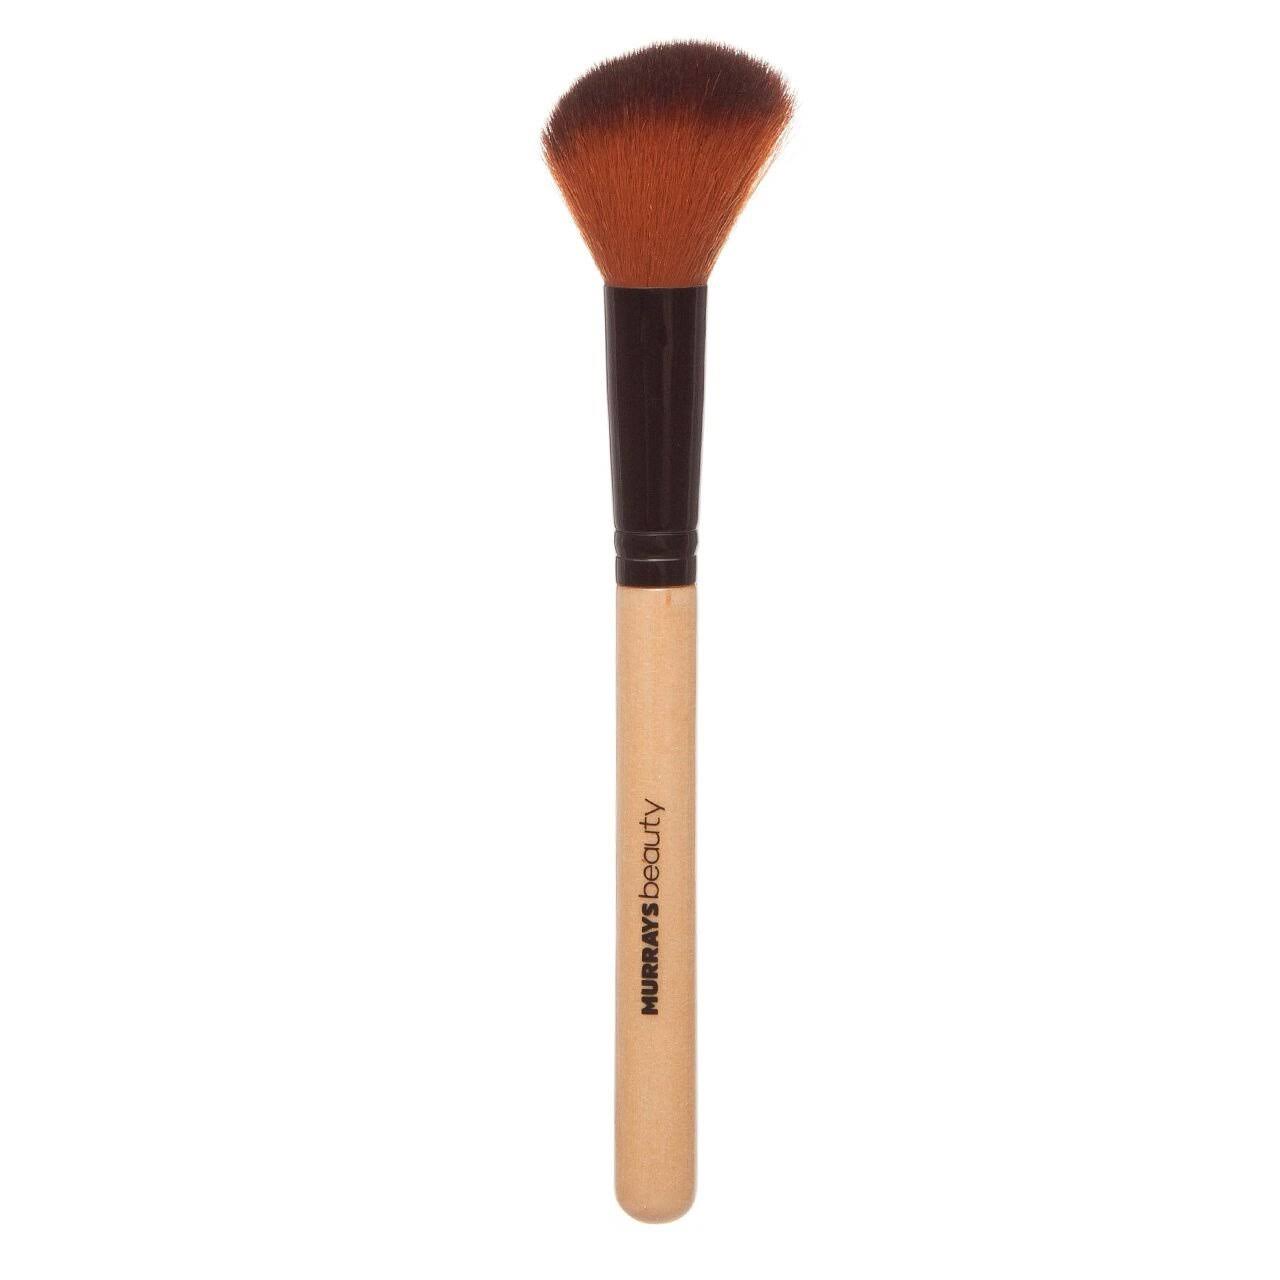 Murrays Manicure Angled Cosmetic Brush, 18 cm | Makeup